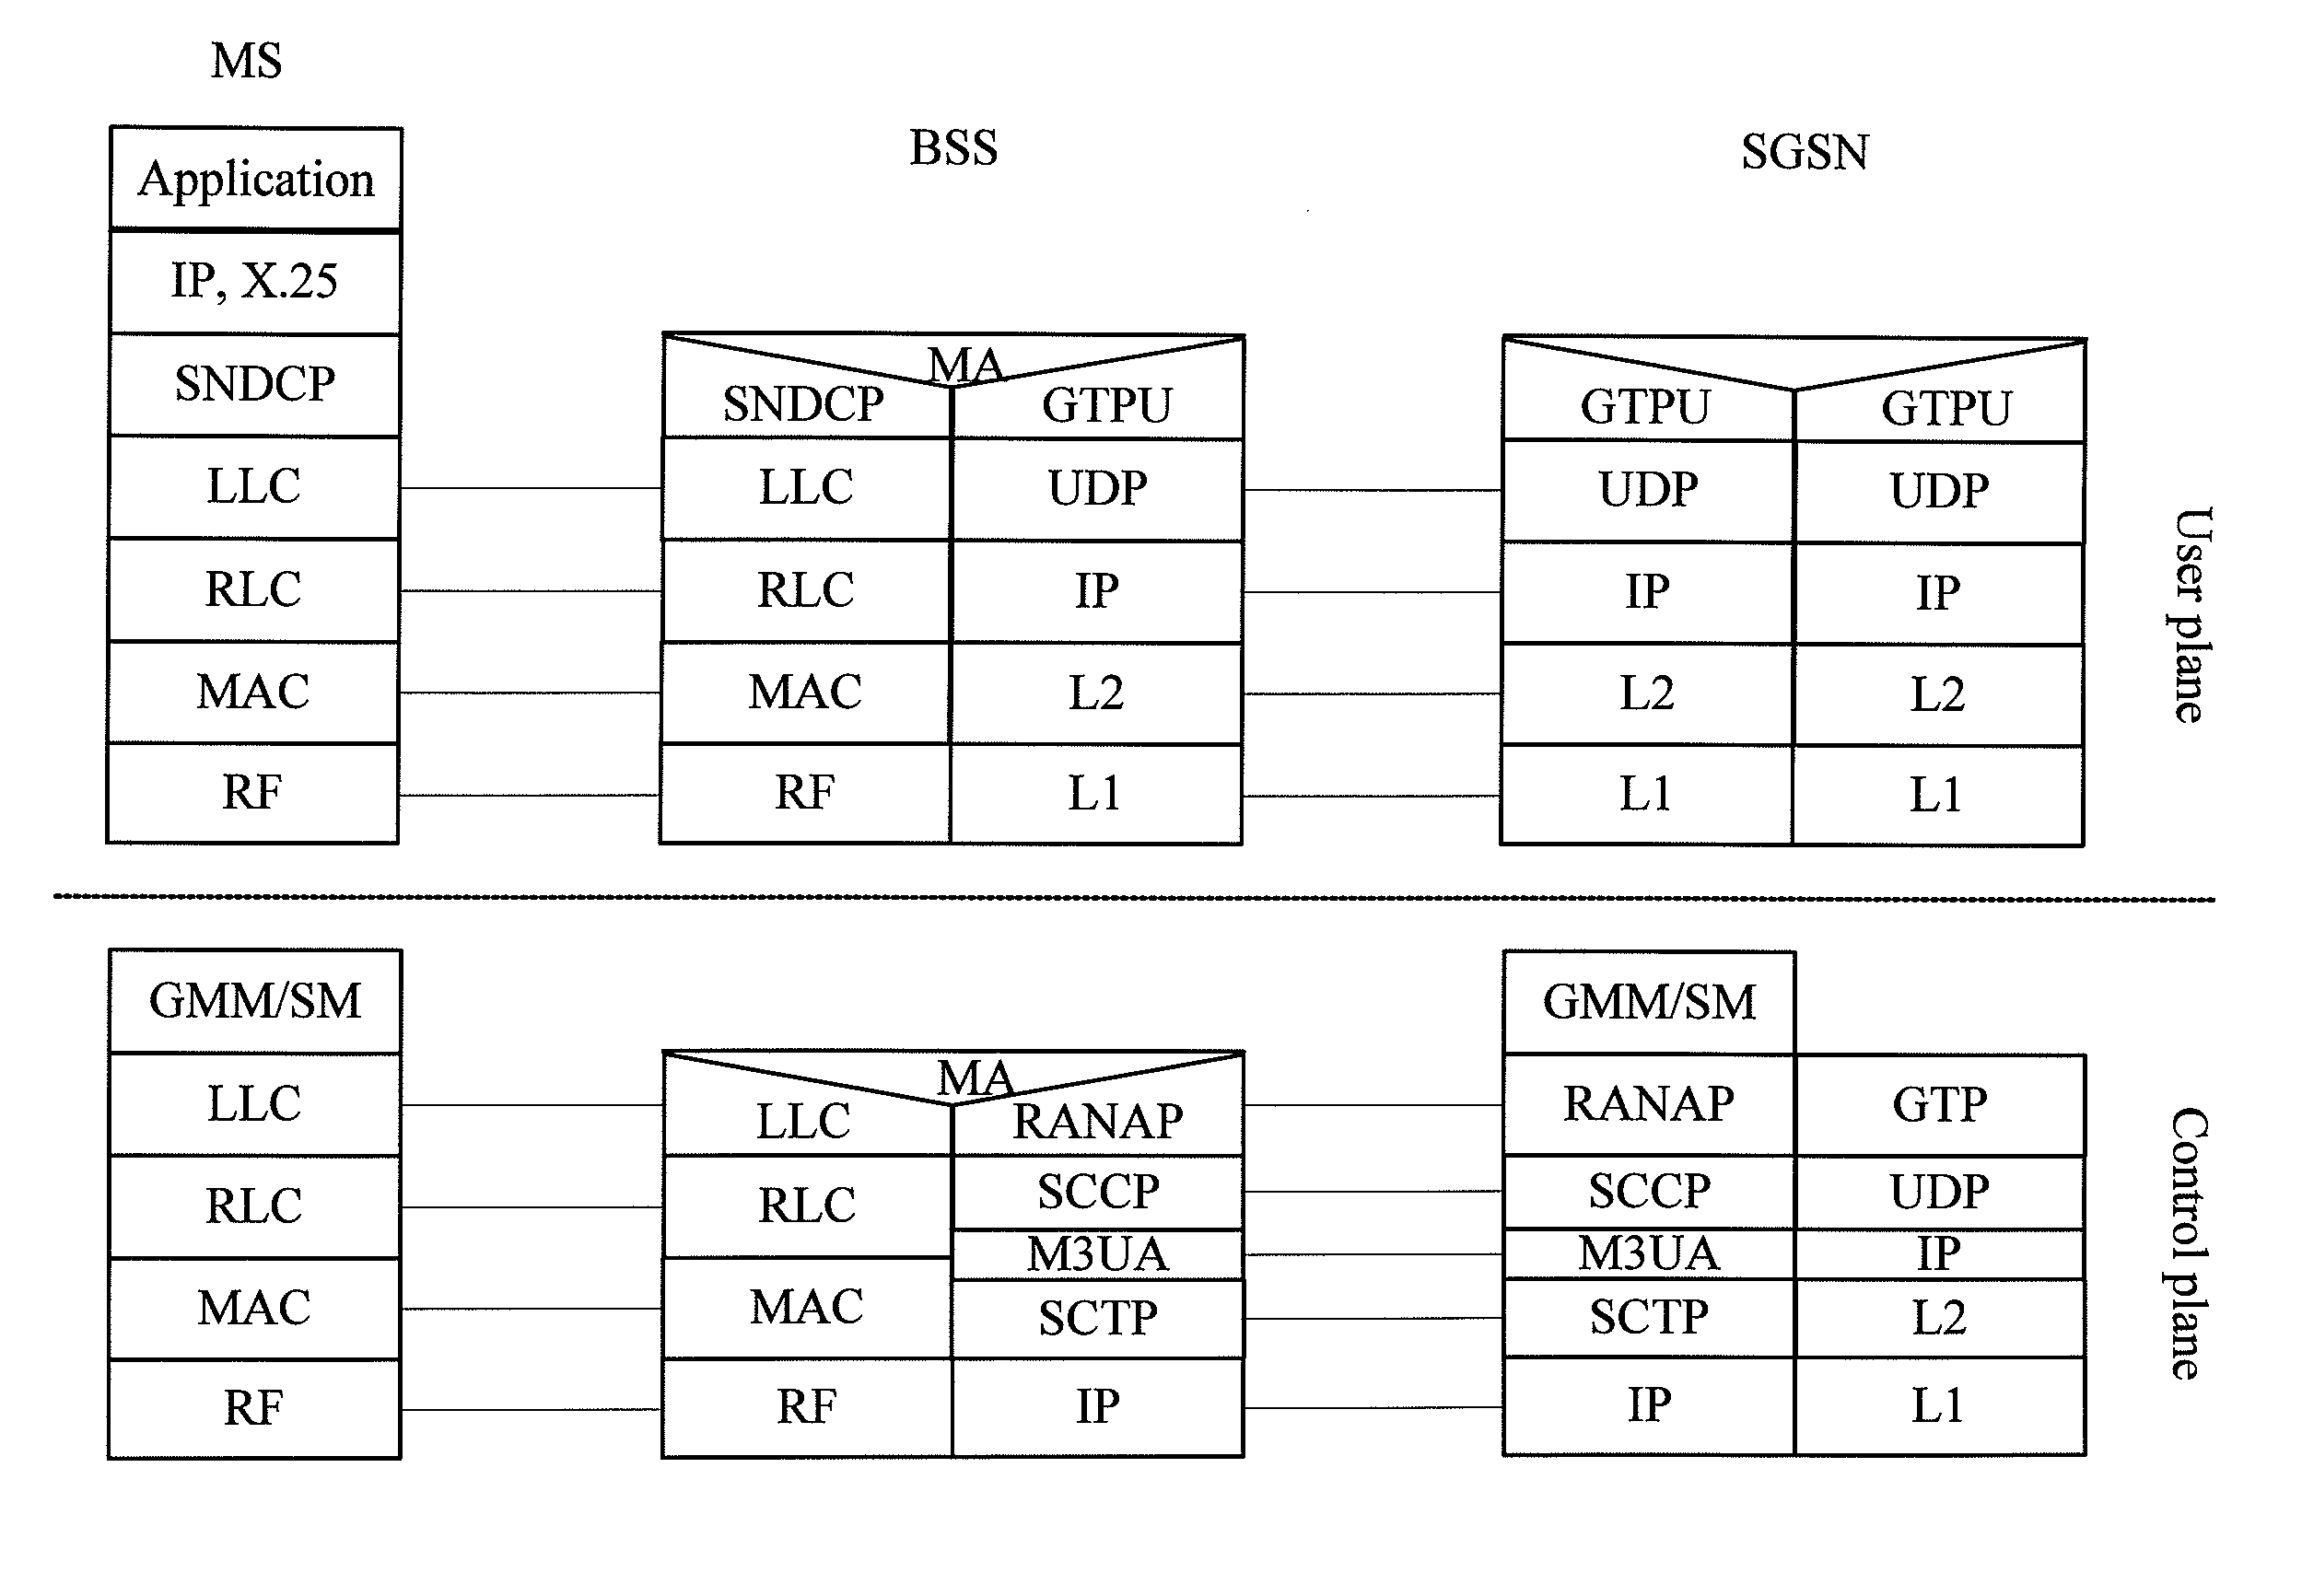 Mobile agent, radio access network, and network adaptation method